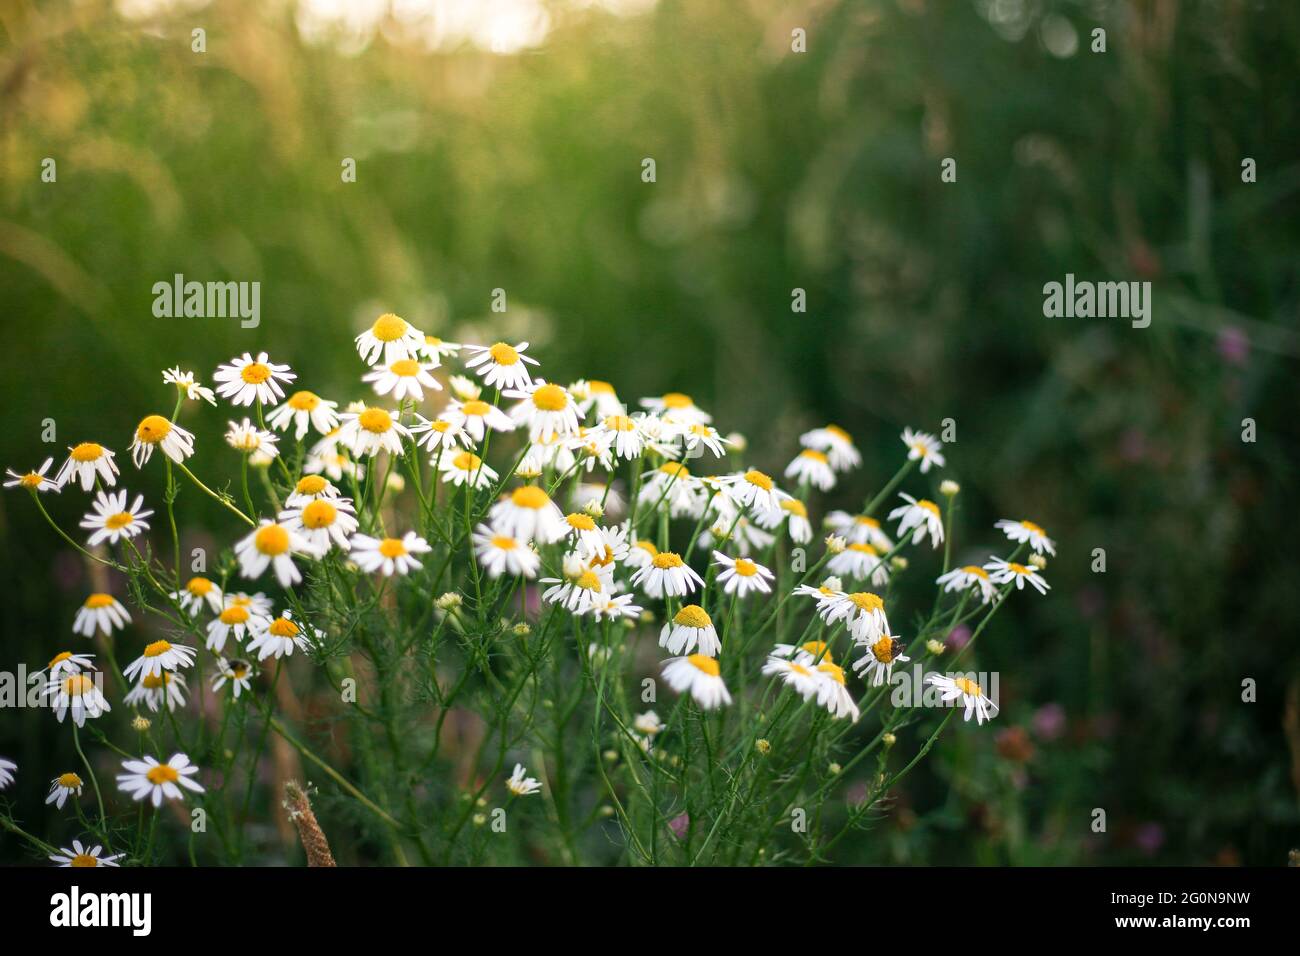 Field daisies in the wild. Flowers with white petals. Stock Photo